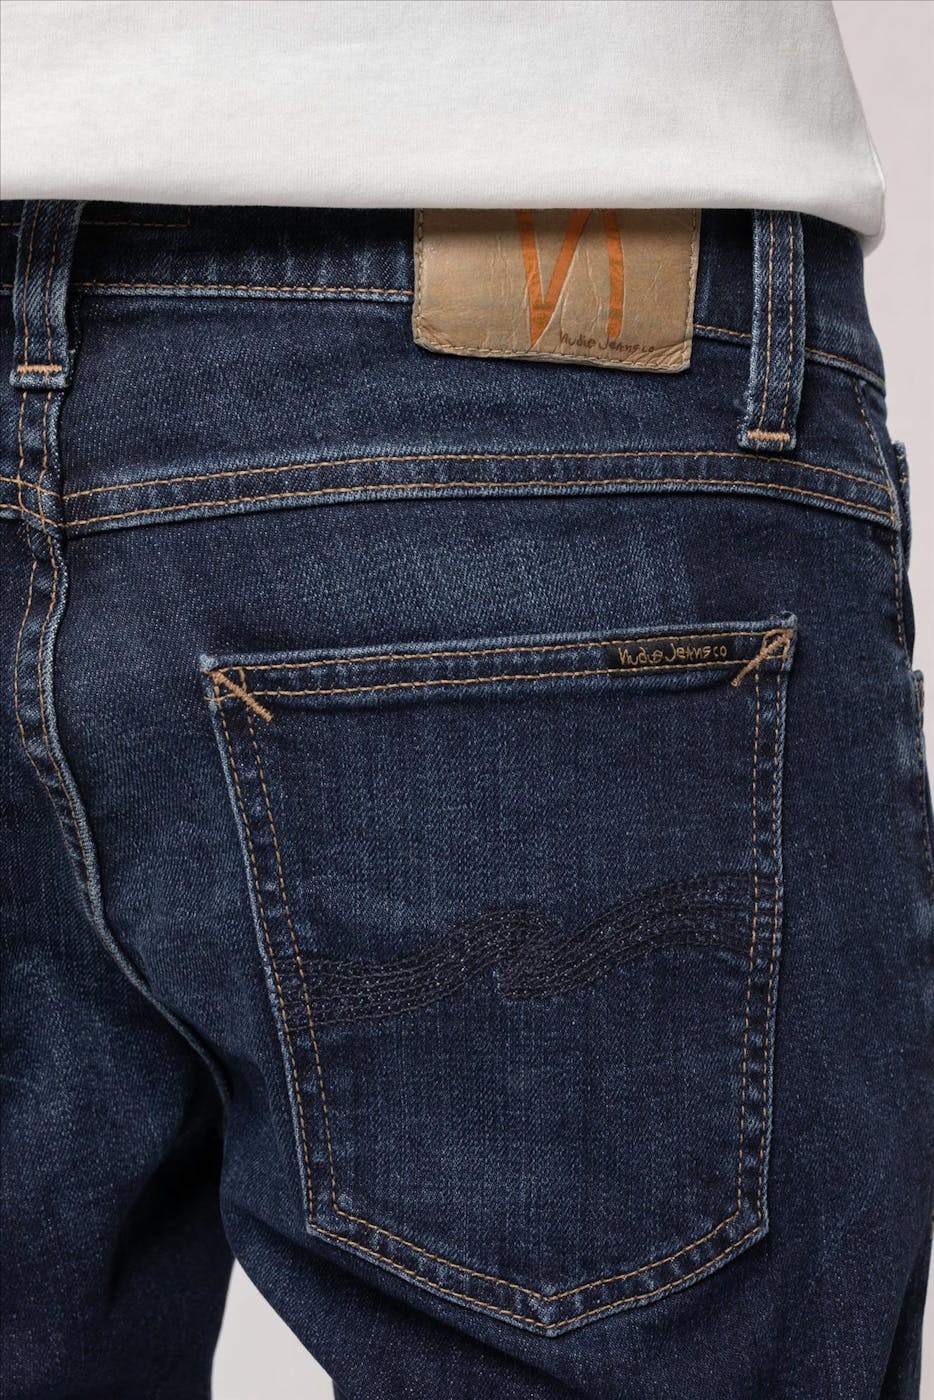 Nudie Jeans Co. - Donkerblauwe Tight Terry Jeans